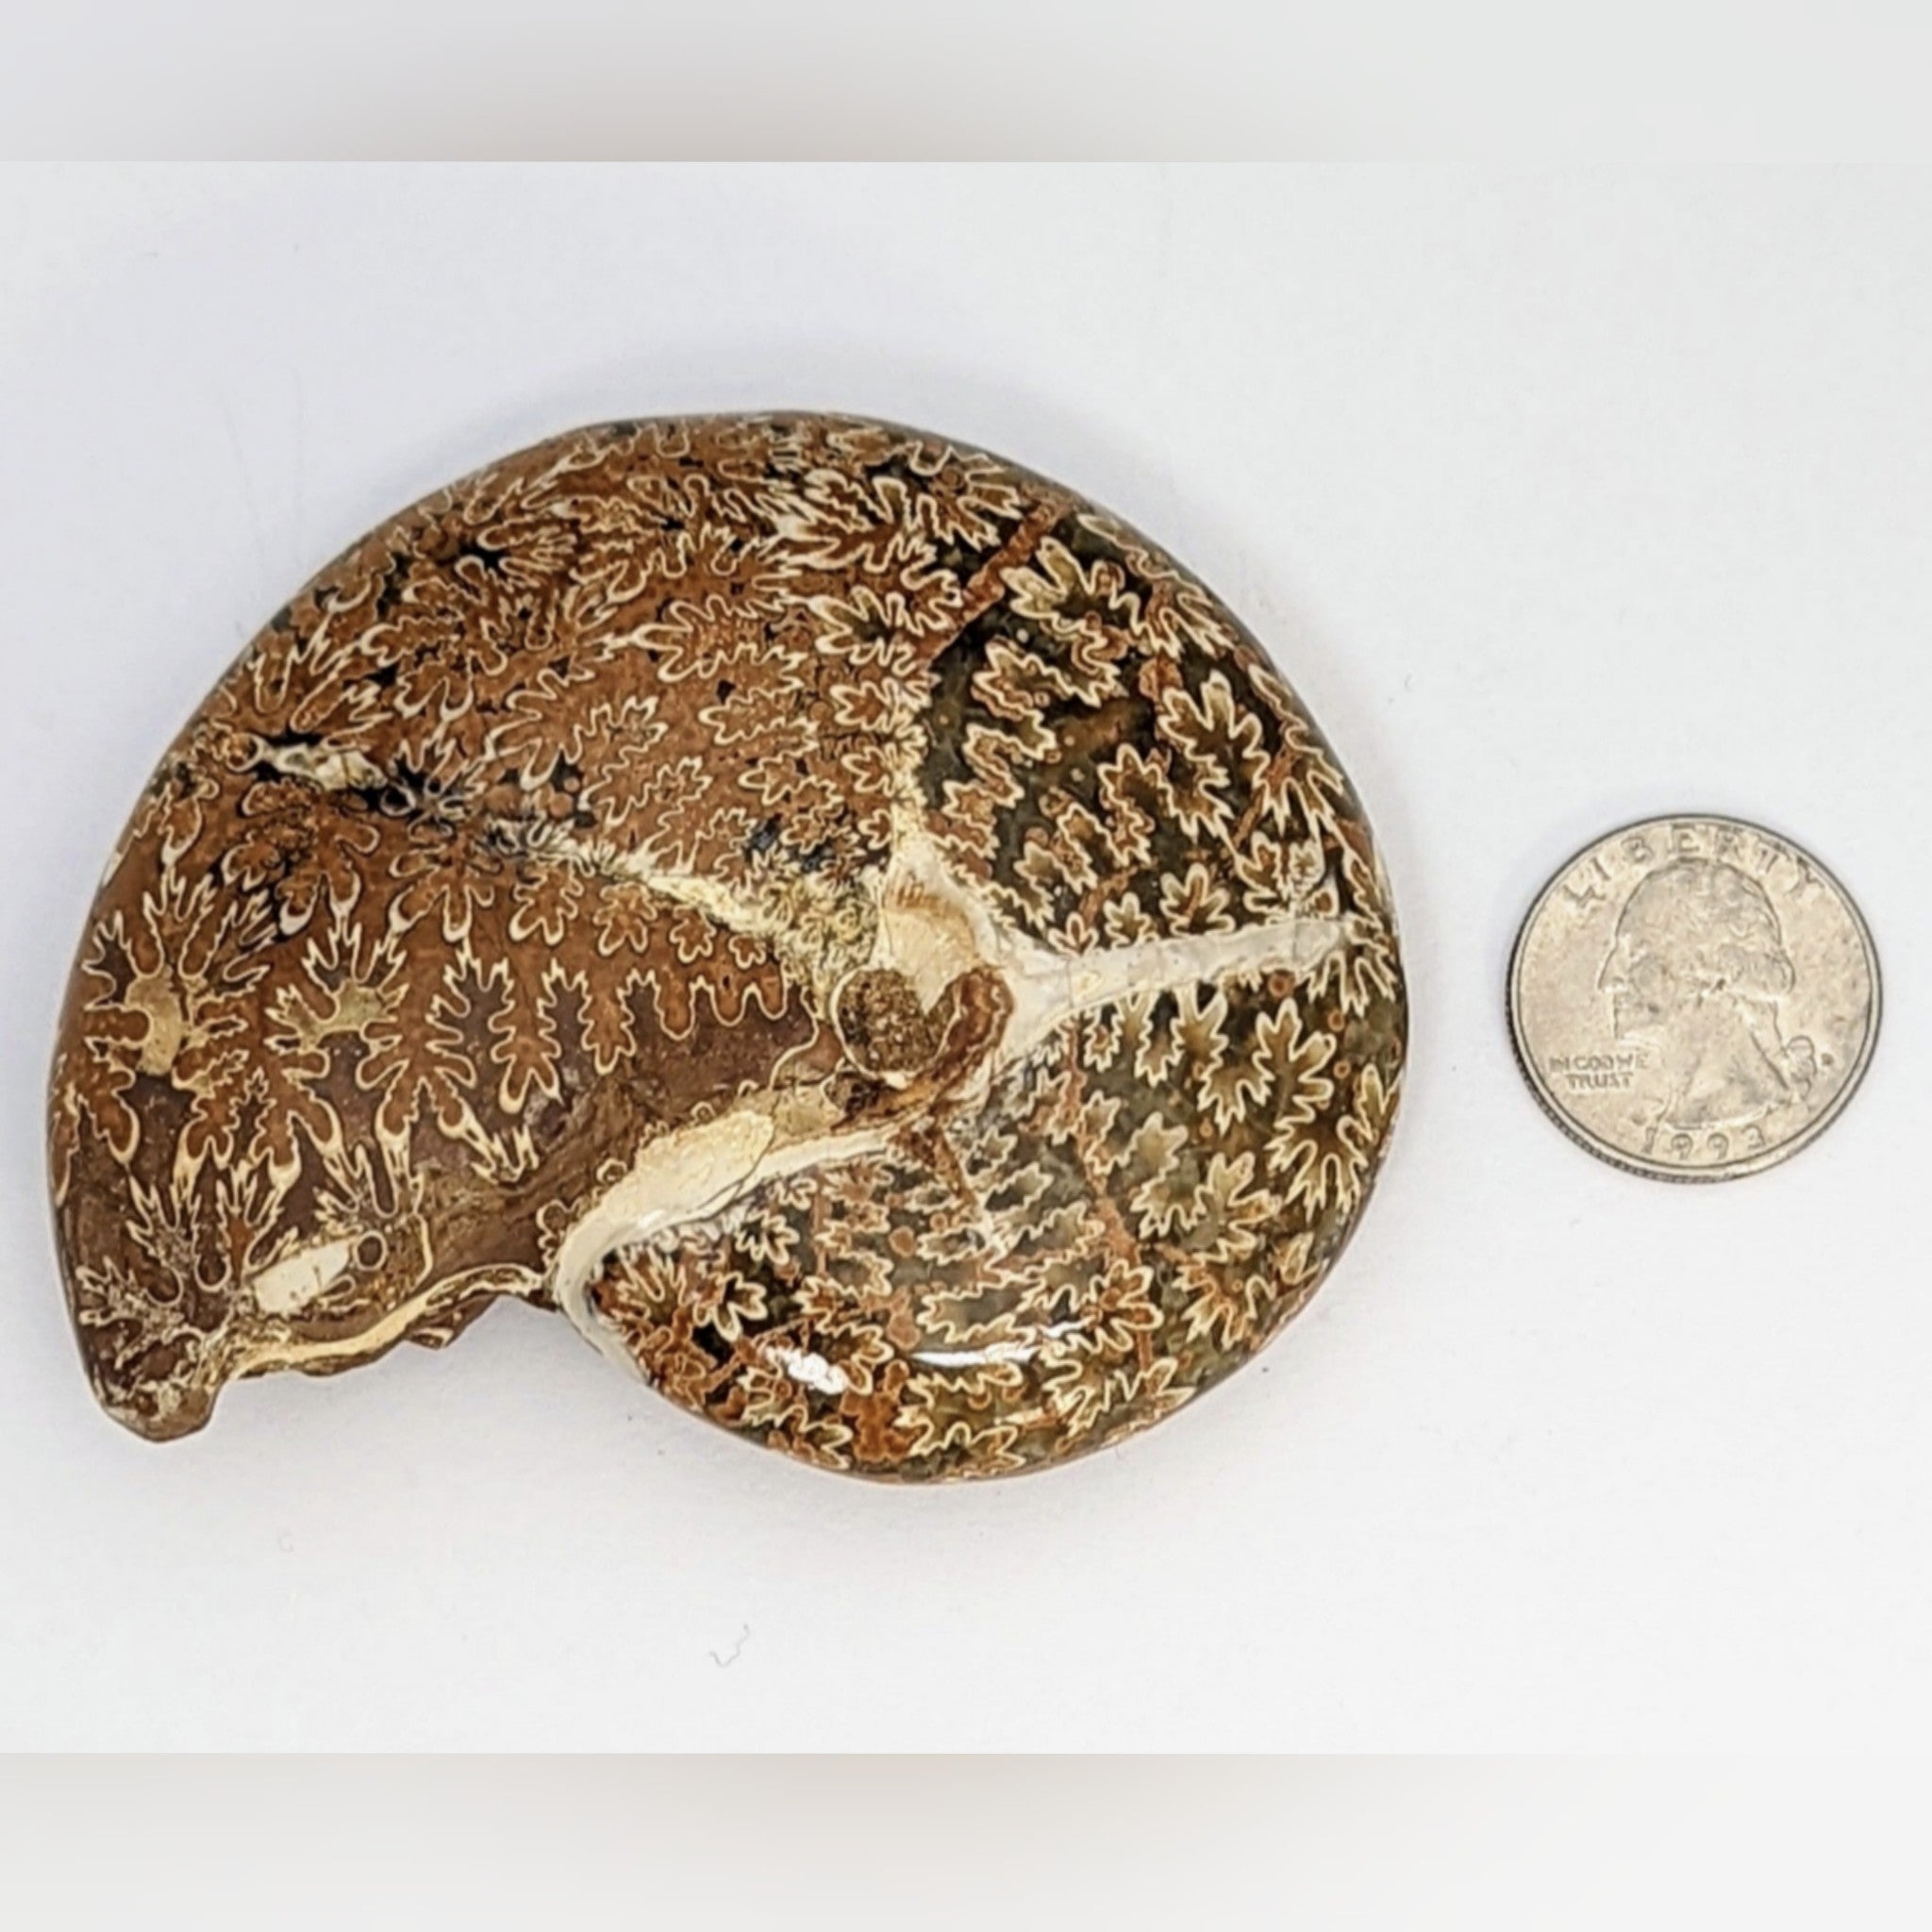 Beautiful whole Ammonite with vibrant sutures.